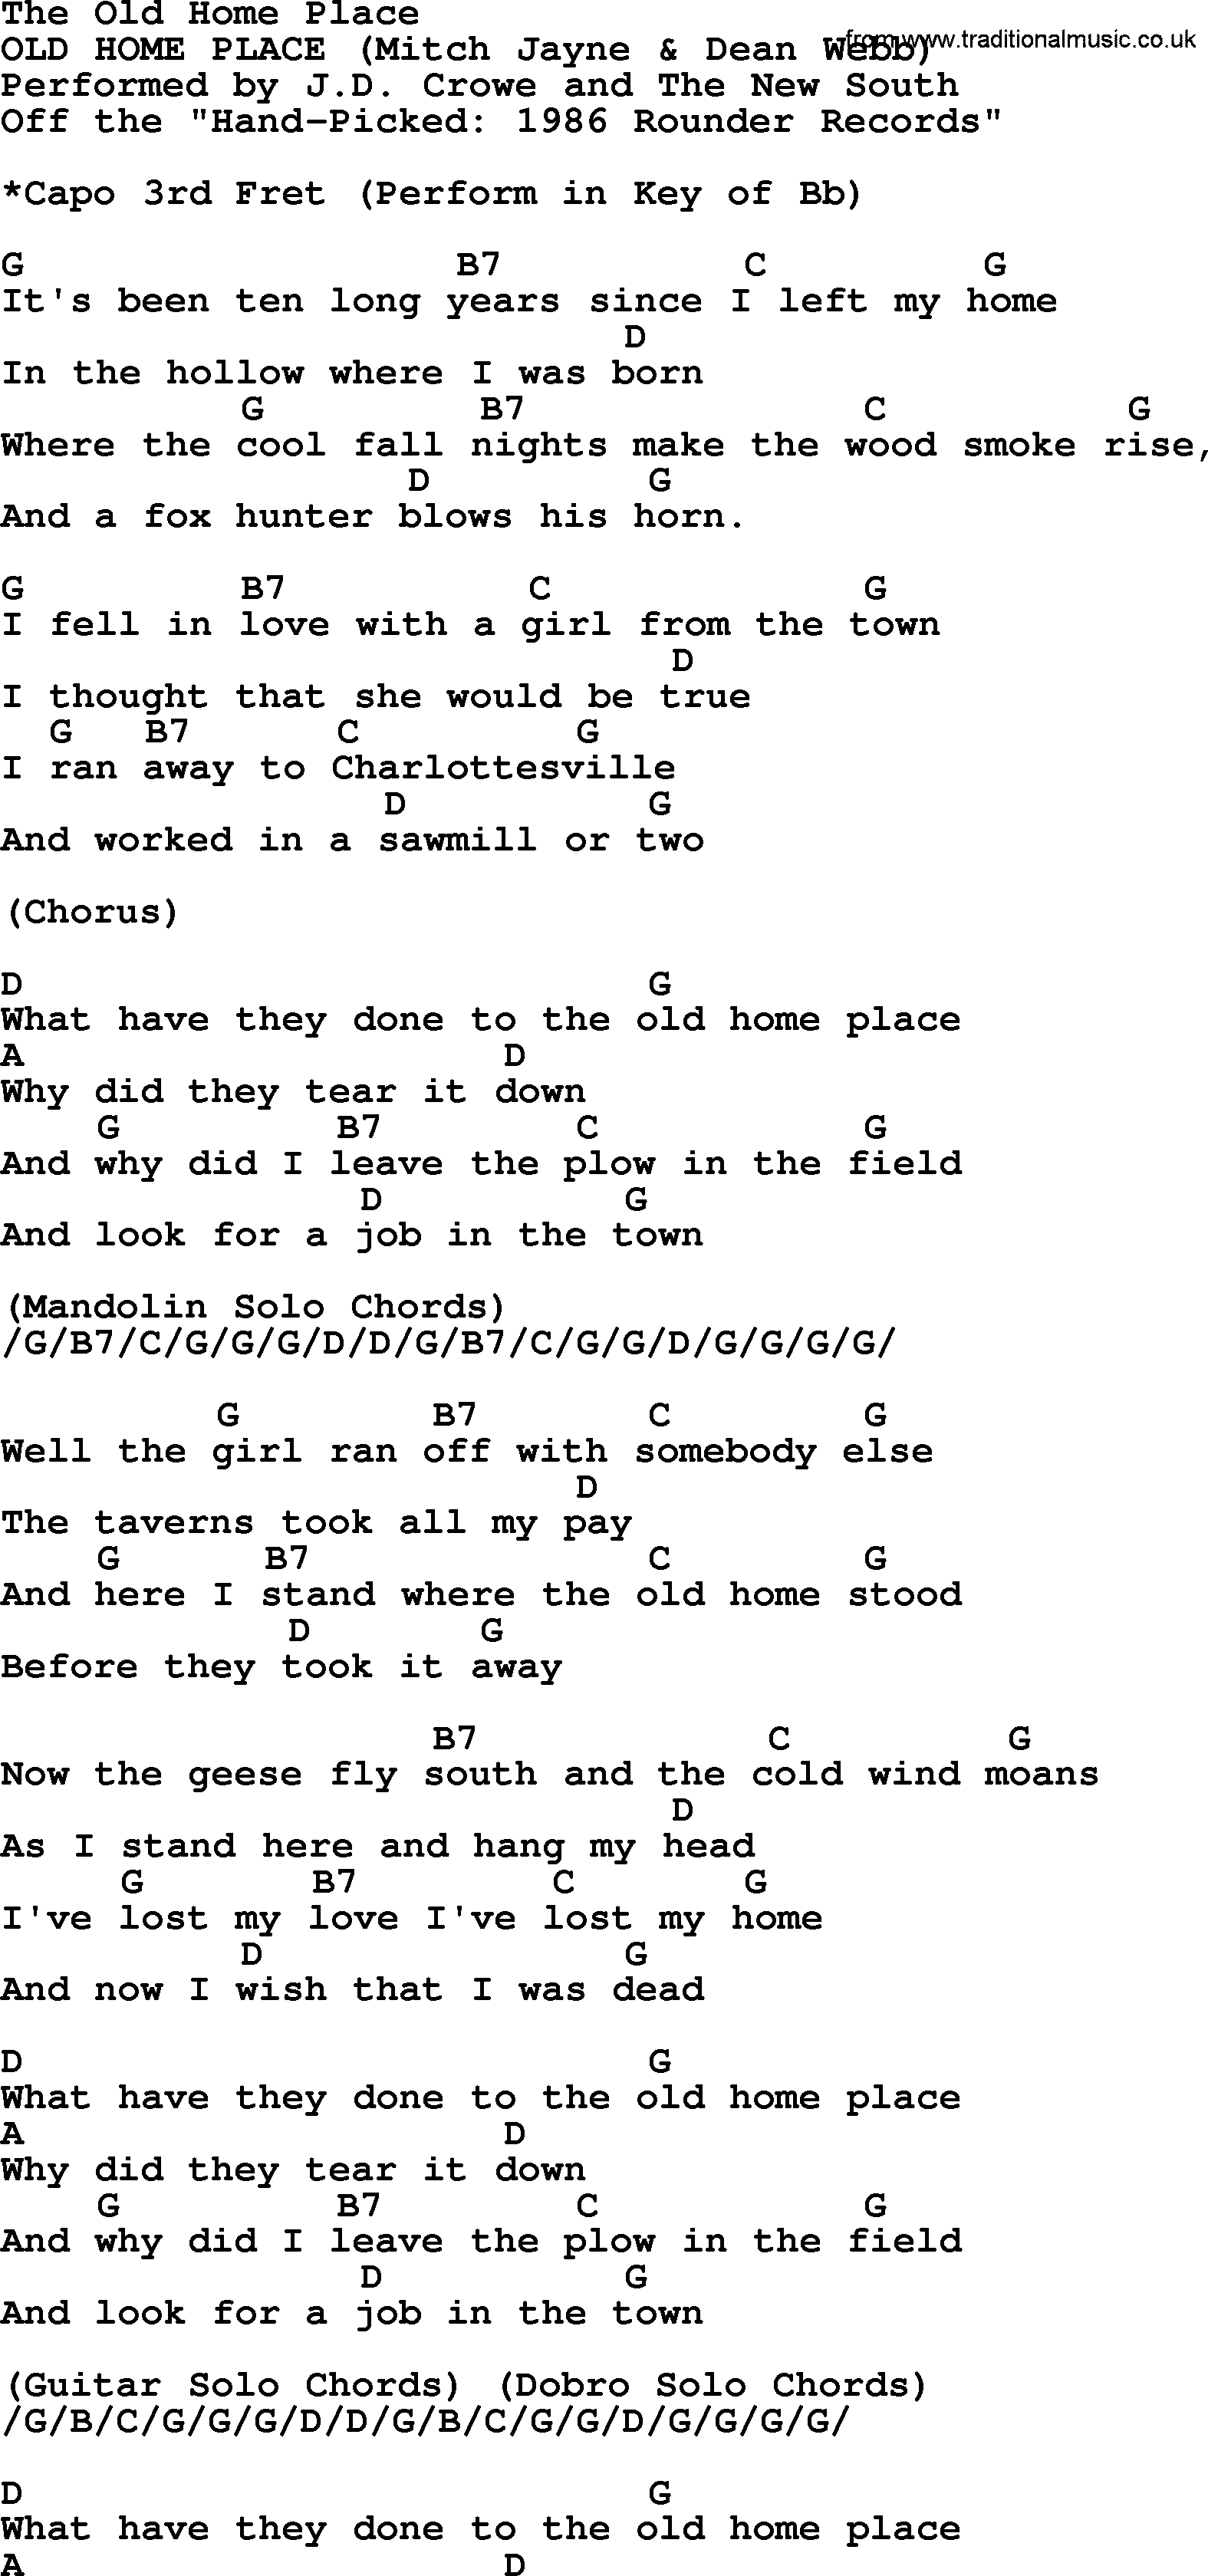 Bluegrass song: The Old Home Place, lyrics and chords